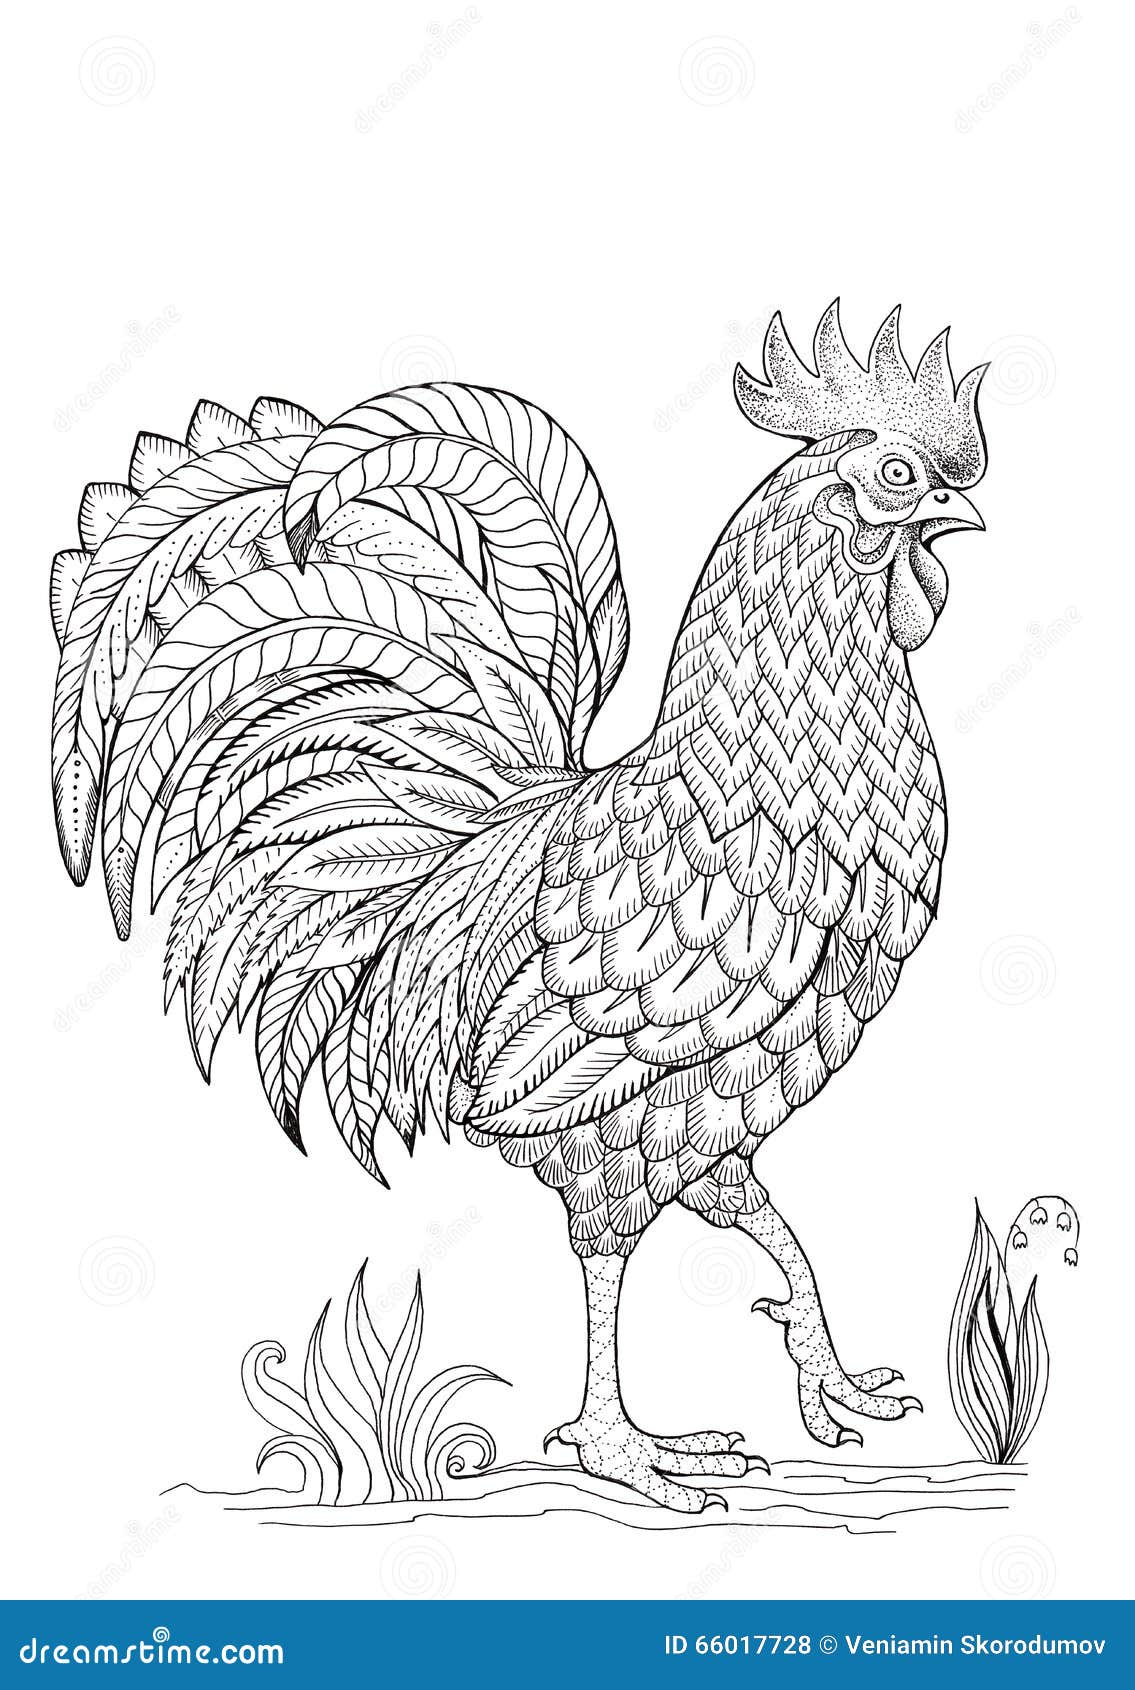 Coloring cock rooster Royalty Free Illustration